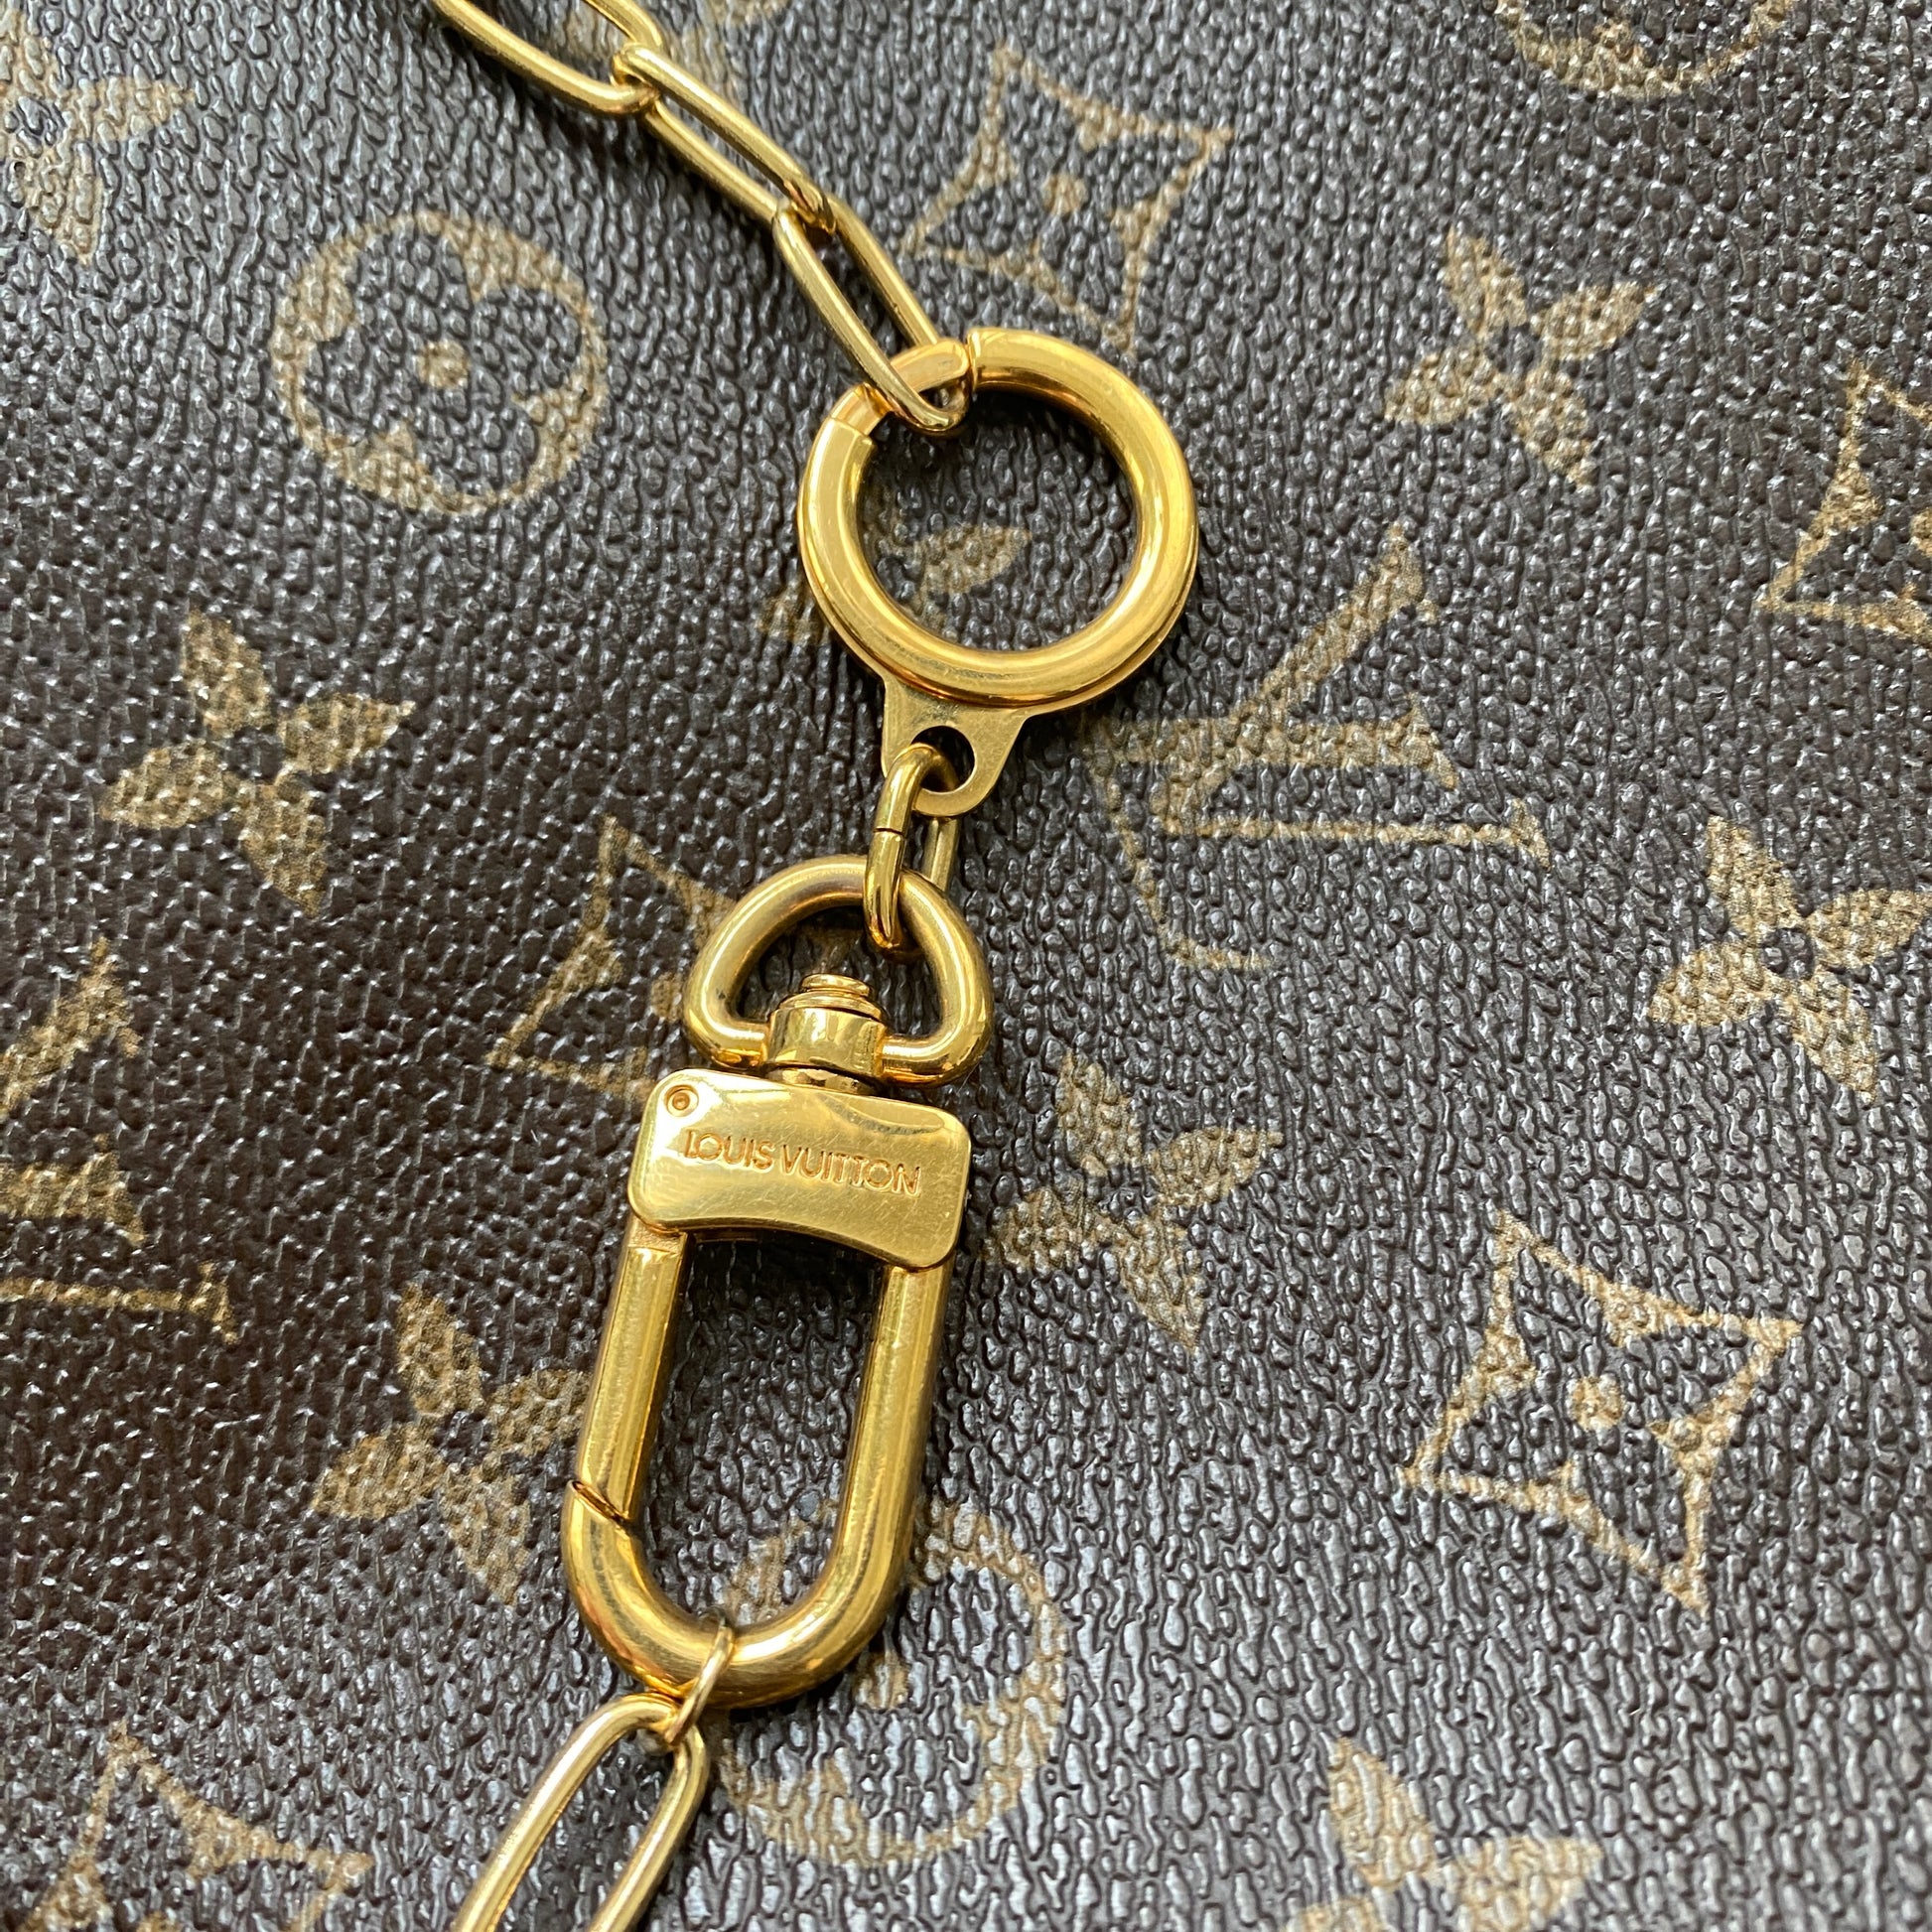 Louis Vuitton Key chain Necklace UPcycled/ REcycled – Luxreloved